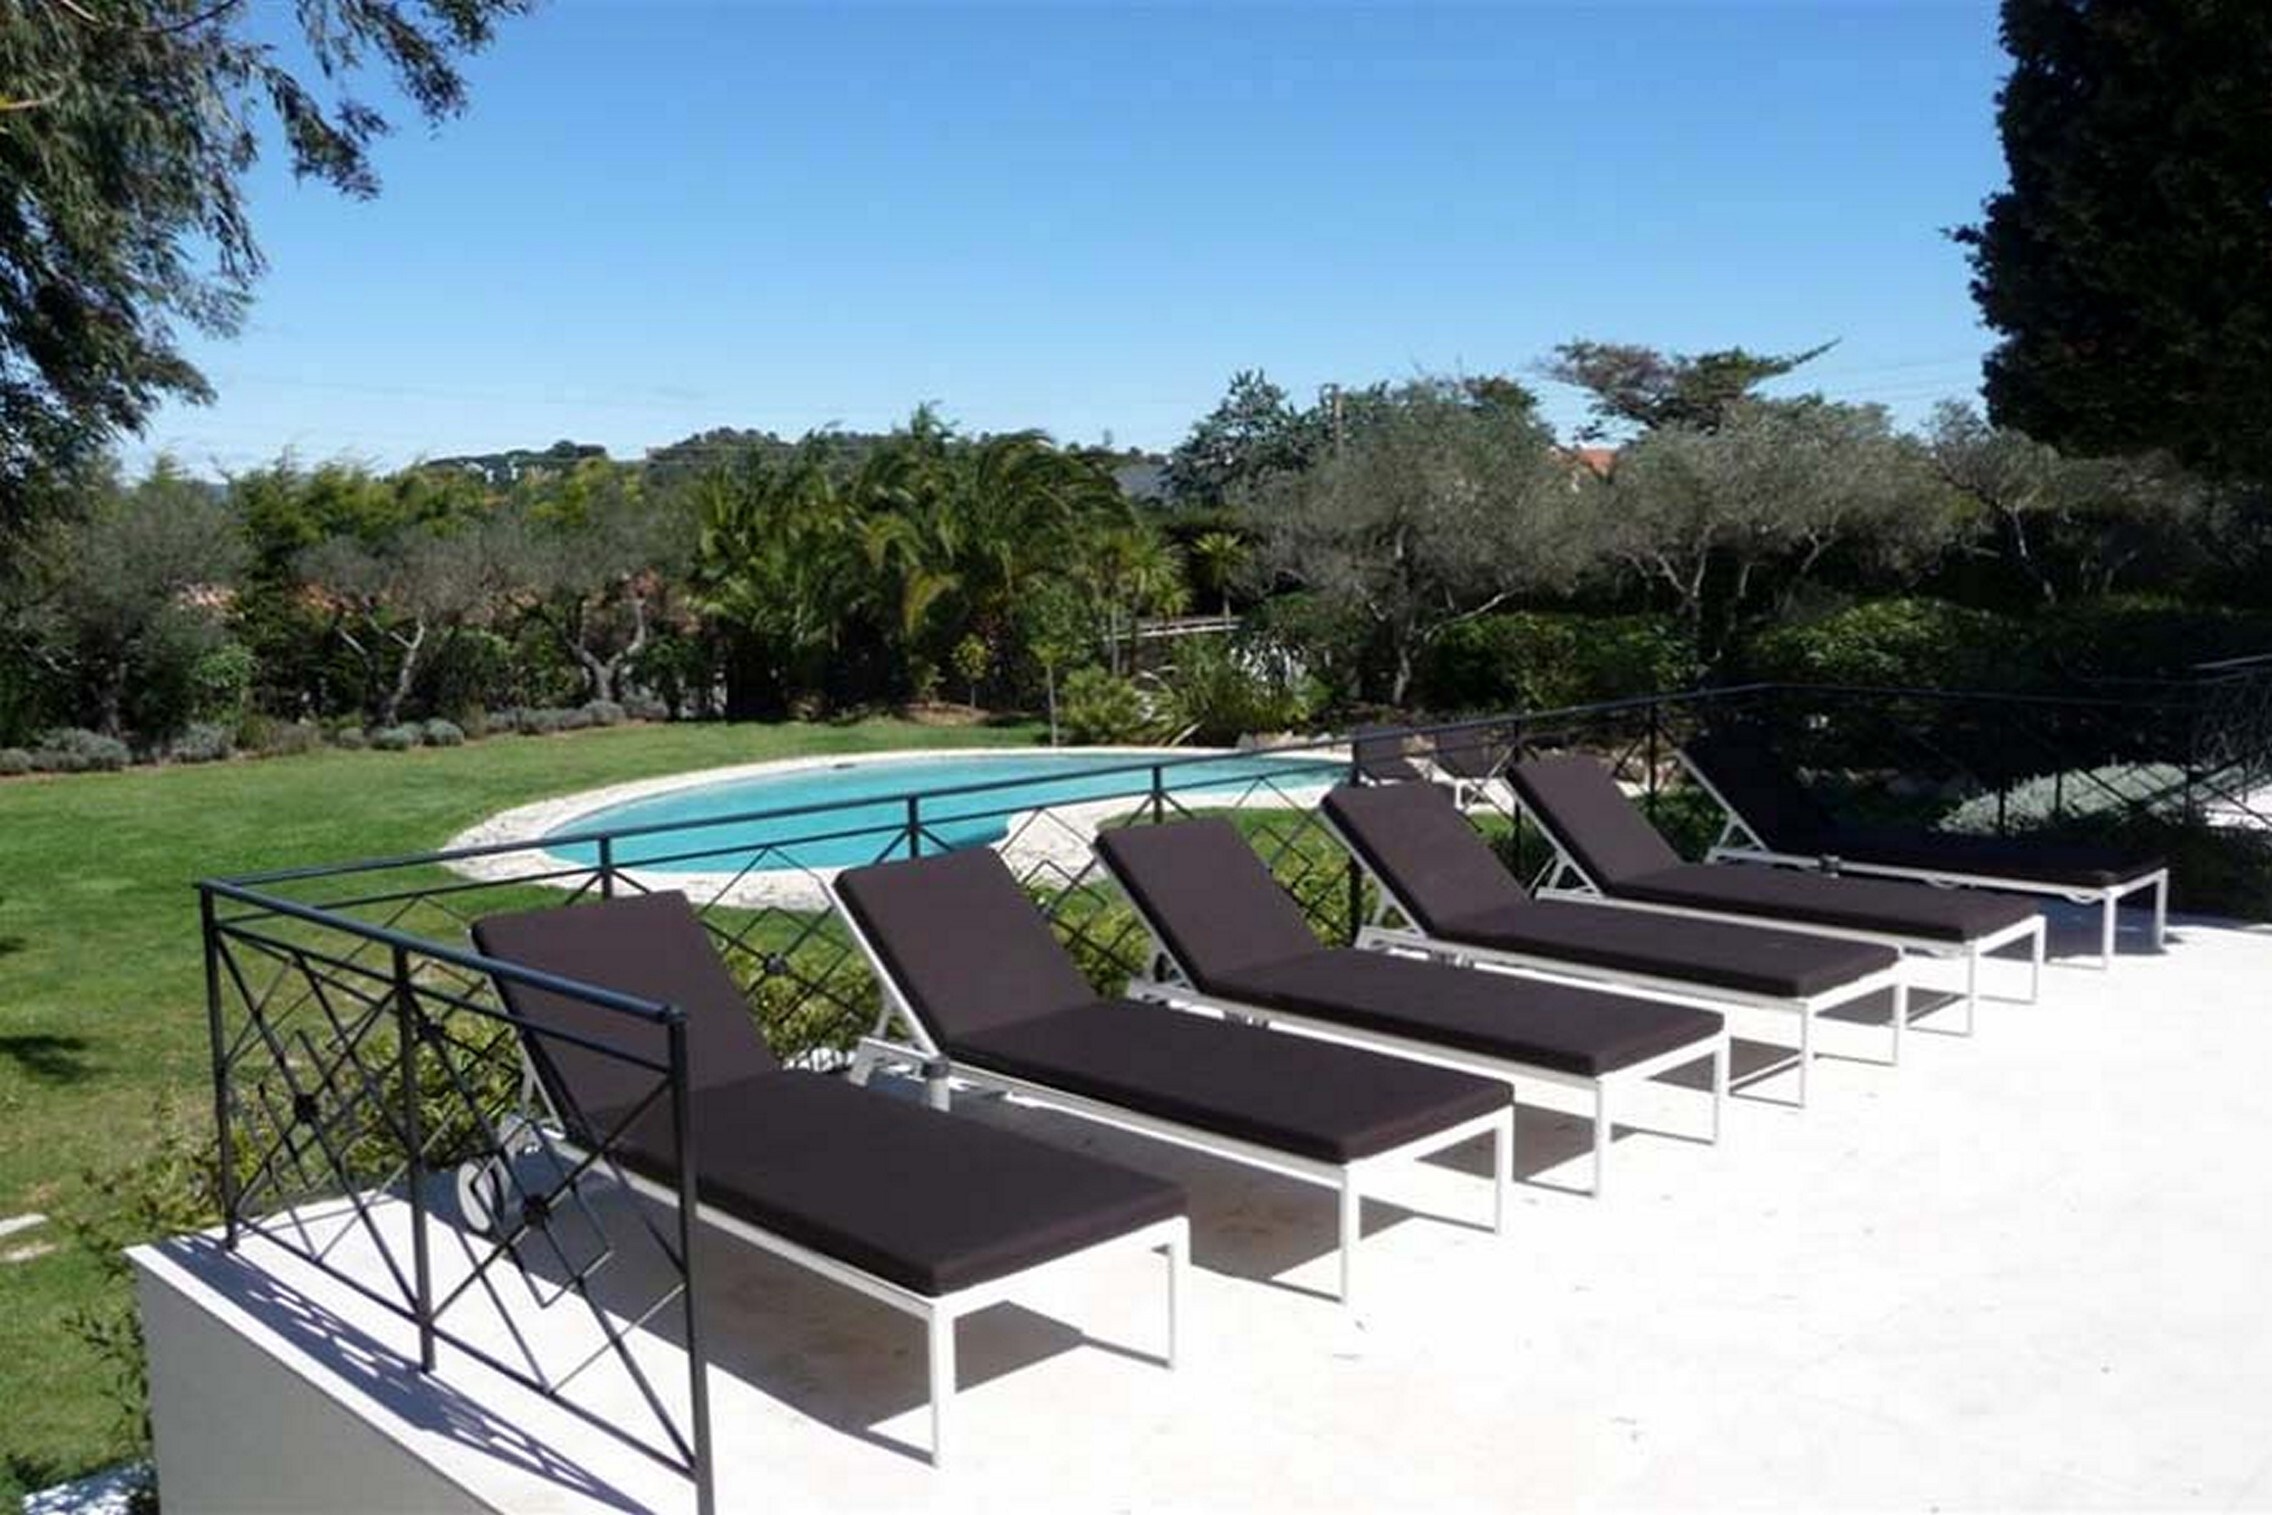 Property Image 2 - Exceptional 5 bedroom family villa with large pool and AC within walking distance of Saint Tropez centre